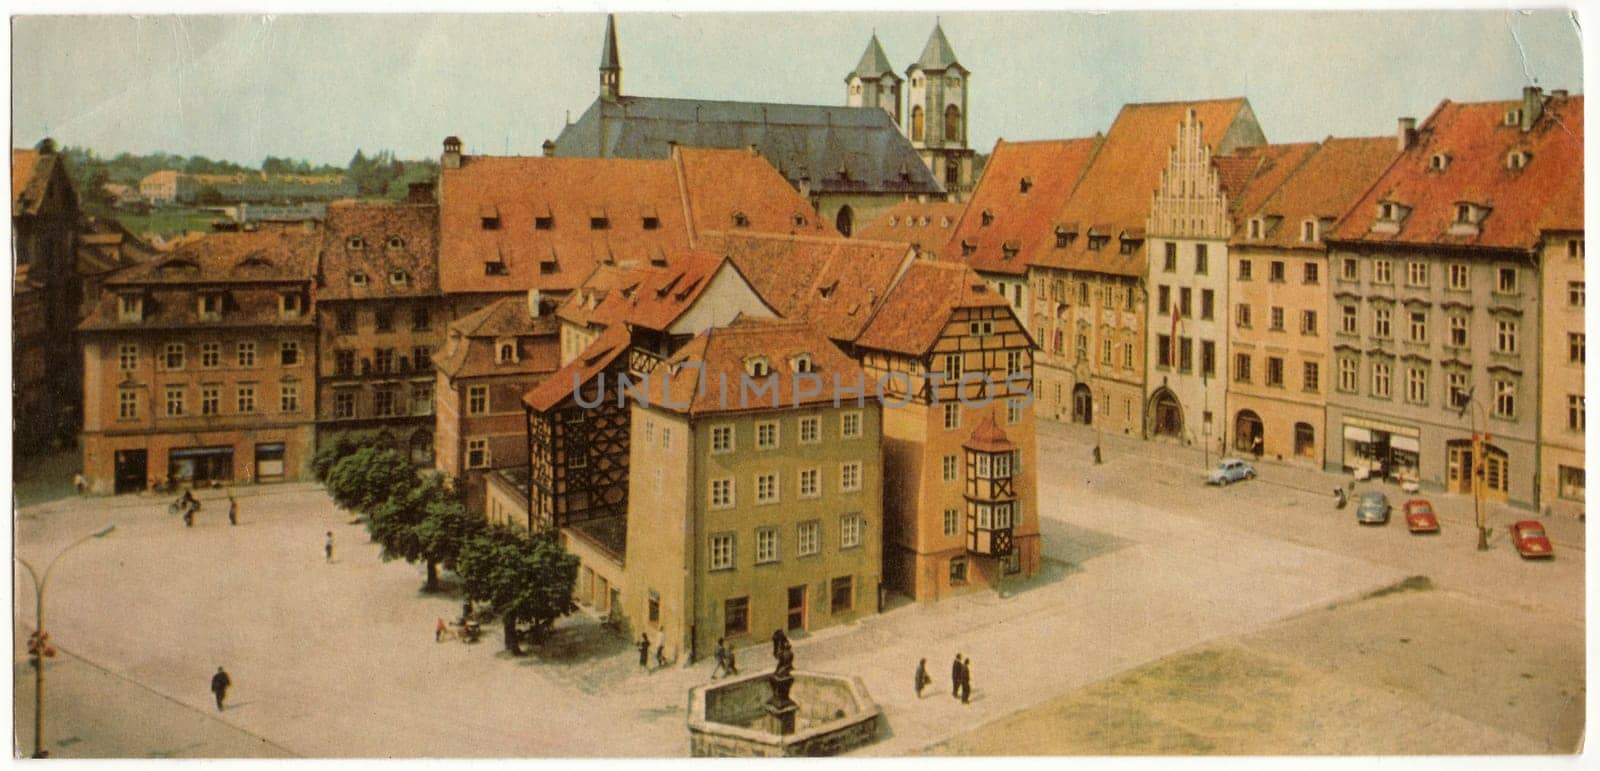 THE CZECHOSLOVAK SOCIALIST REPUBLIC - CIRCA 1967: Vintage postcard shows group of medieval market-houses in Cheb.